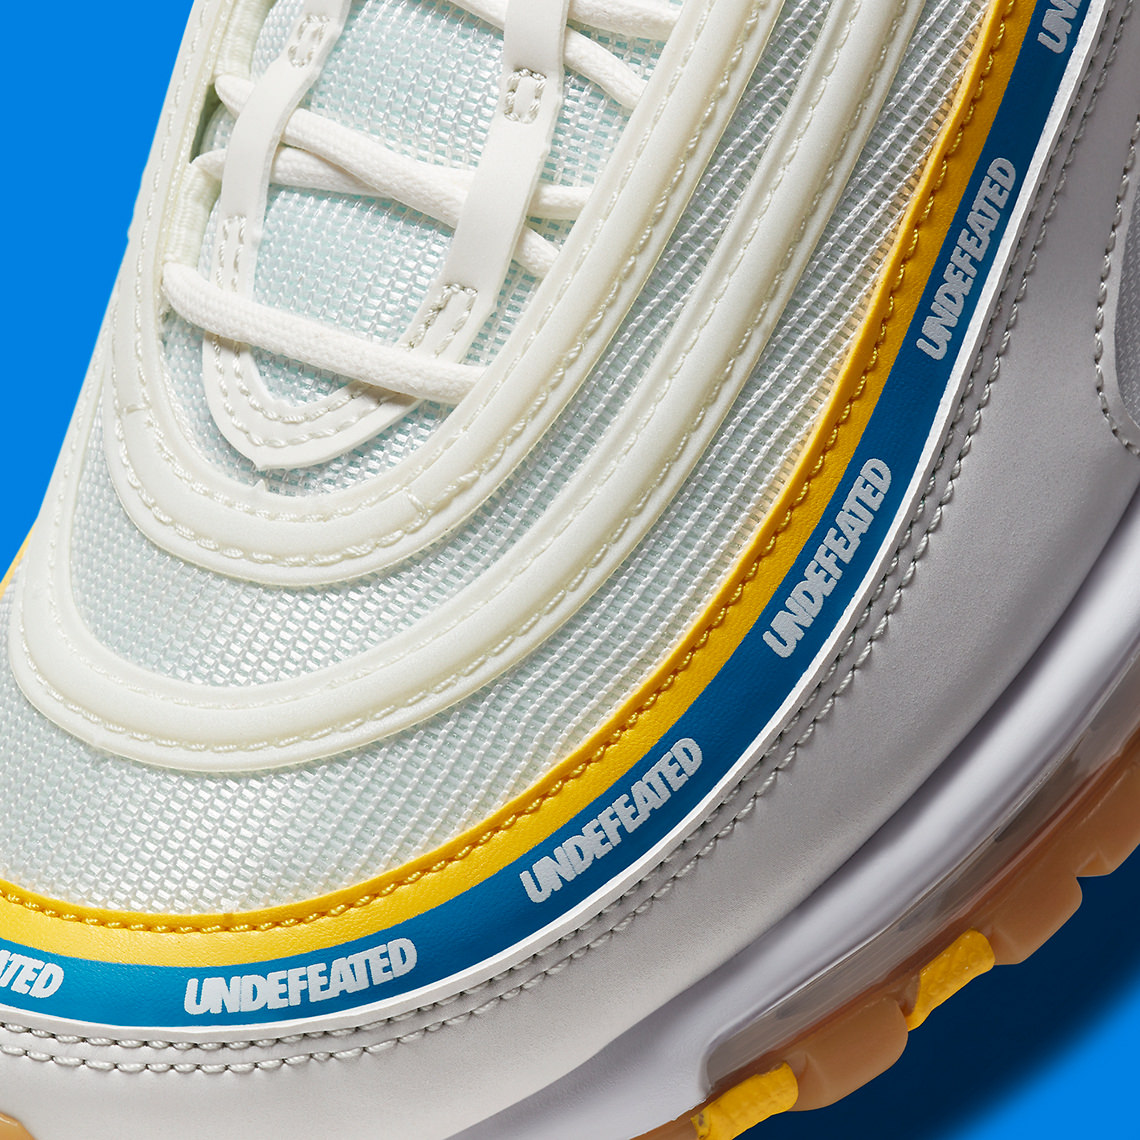 undefeated-nike-air-max-97-ucla-DC4830-100-release-date-8